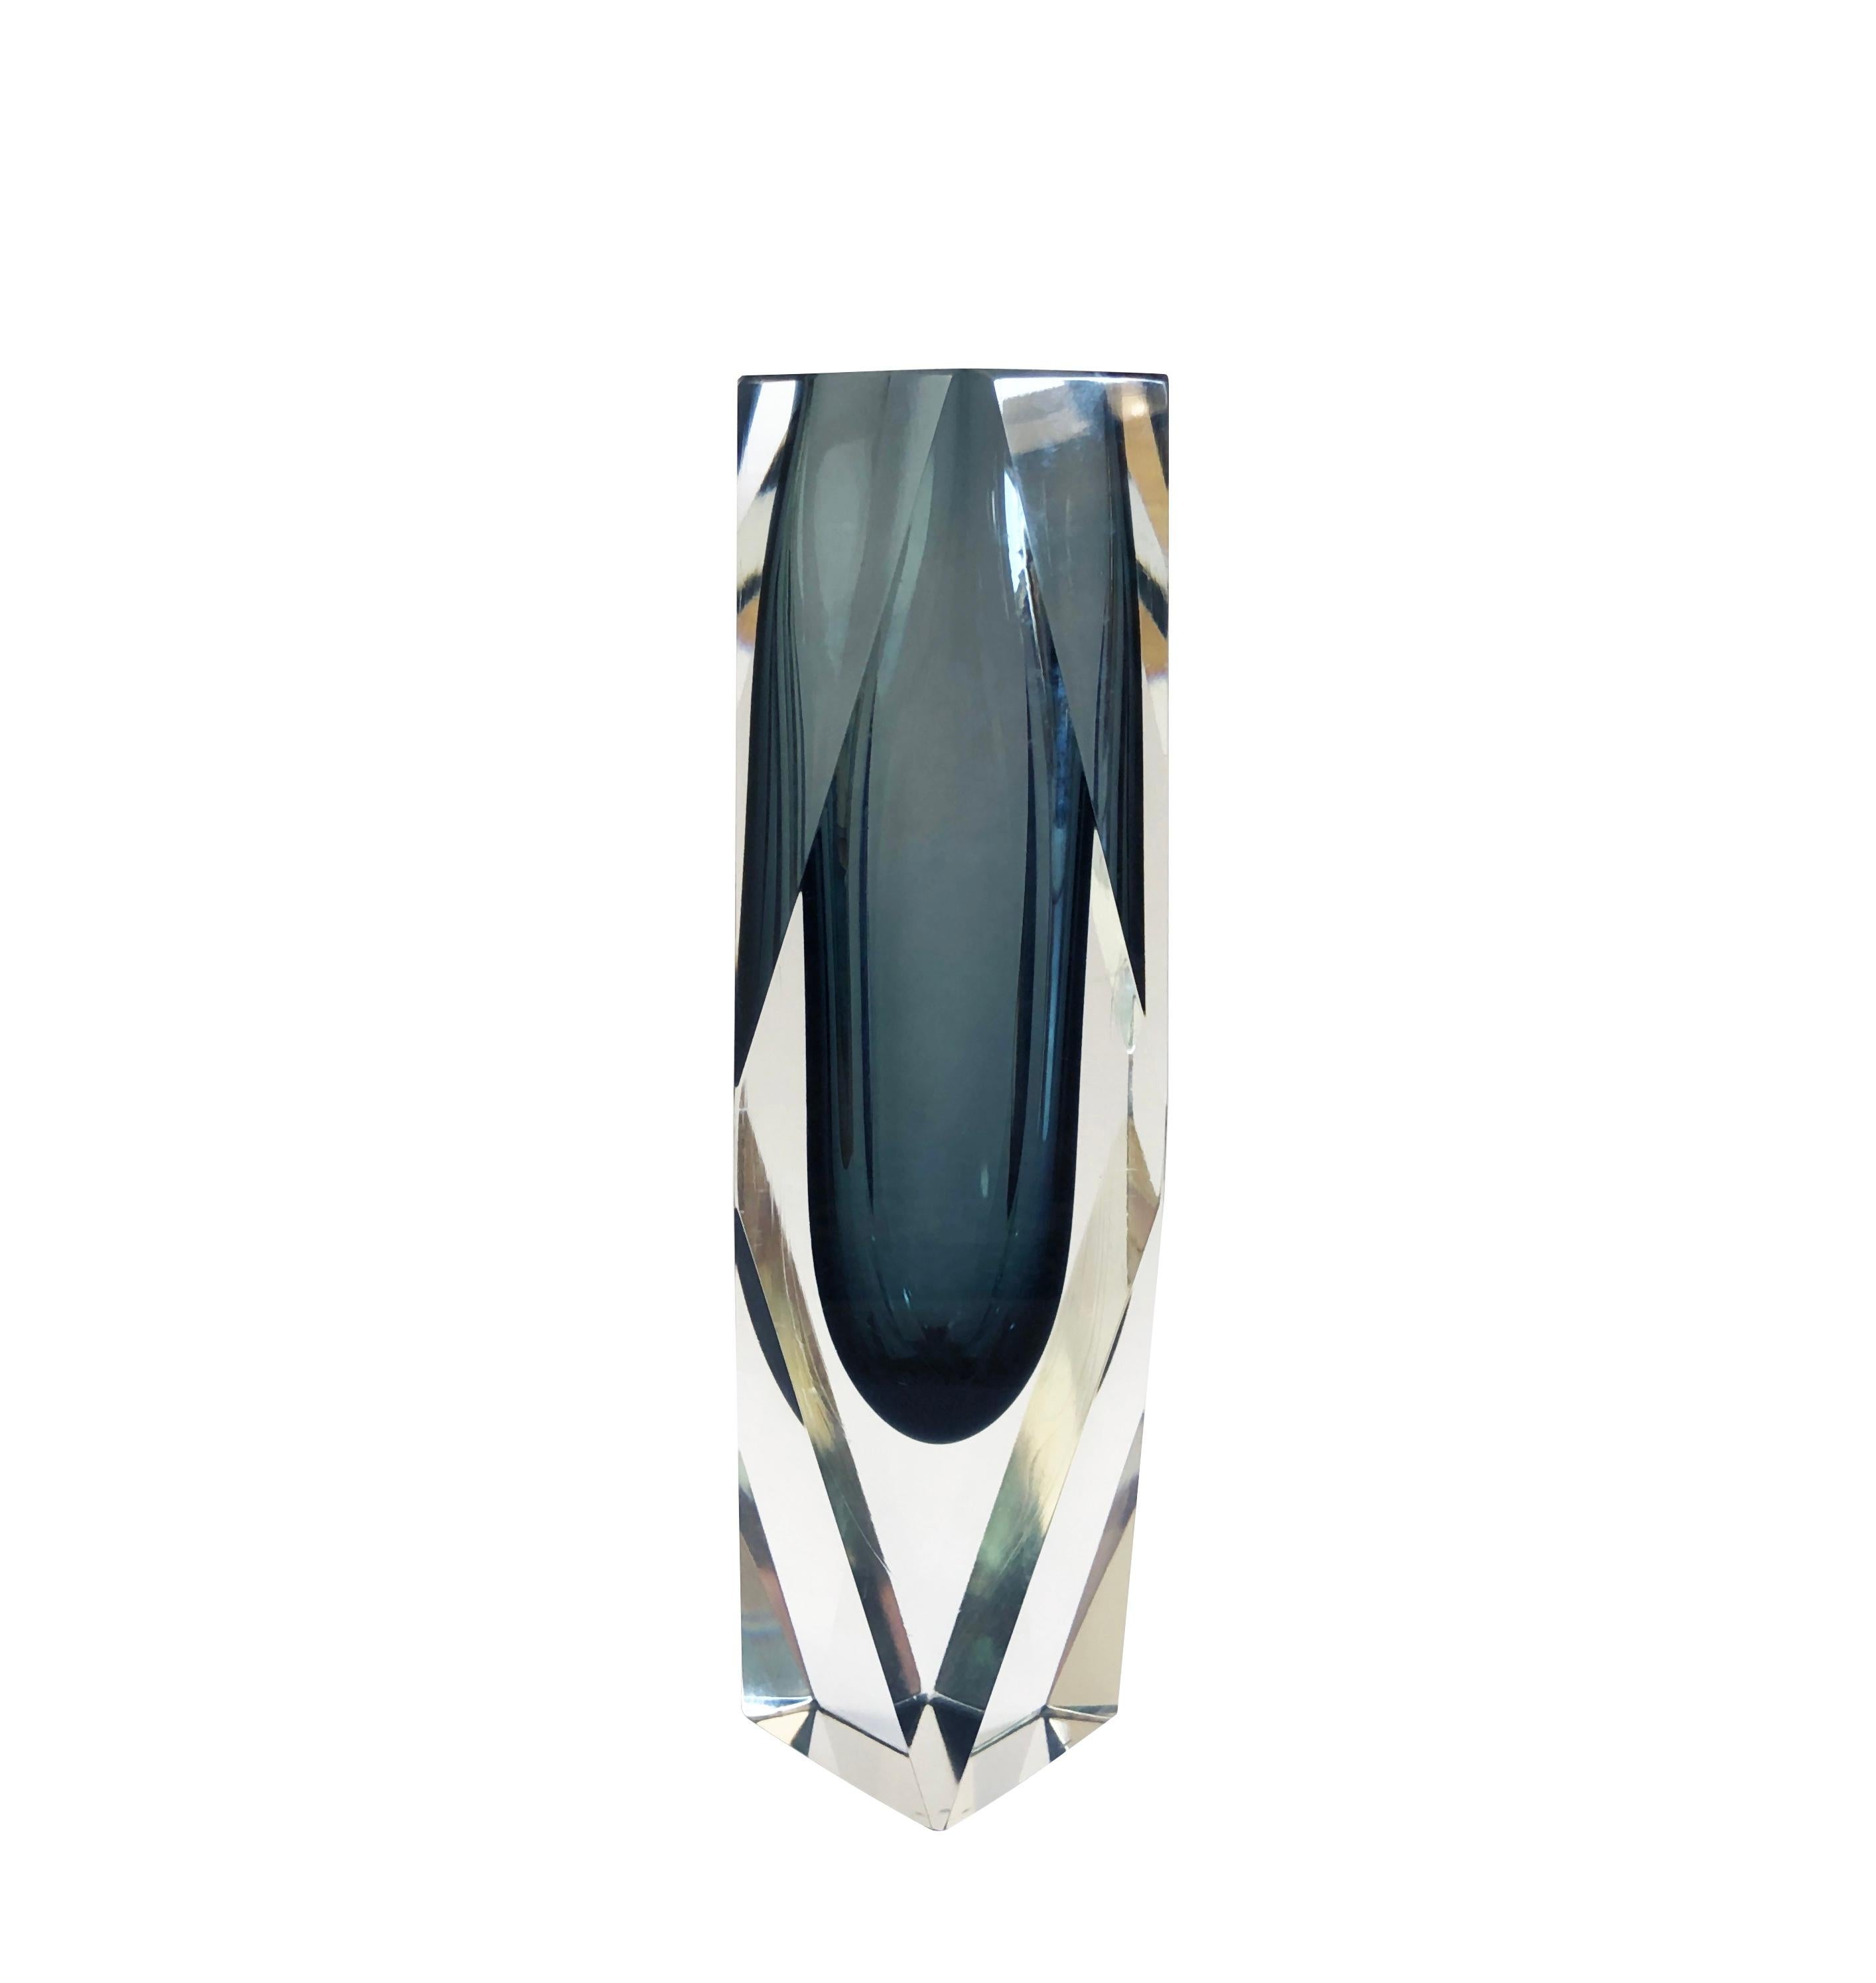 Attributed to the hand of Alessandro Mandruzzato.
Large Venetian Murano Sommerso faceted heavy vase.
Original from the 1960s to 1970s, Italy, Murano.
Gorgeous cut glass in an intricate faceted shape, heavy and in a wonderful smoke grey at the